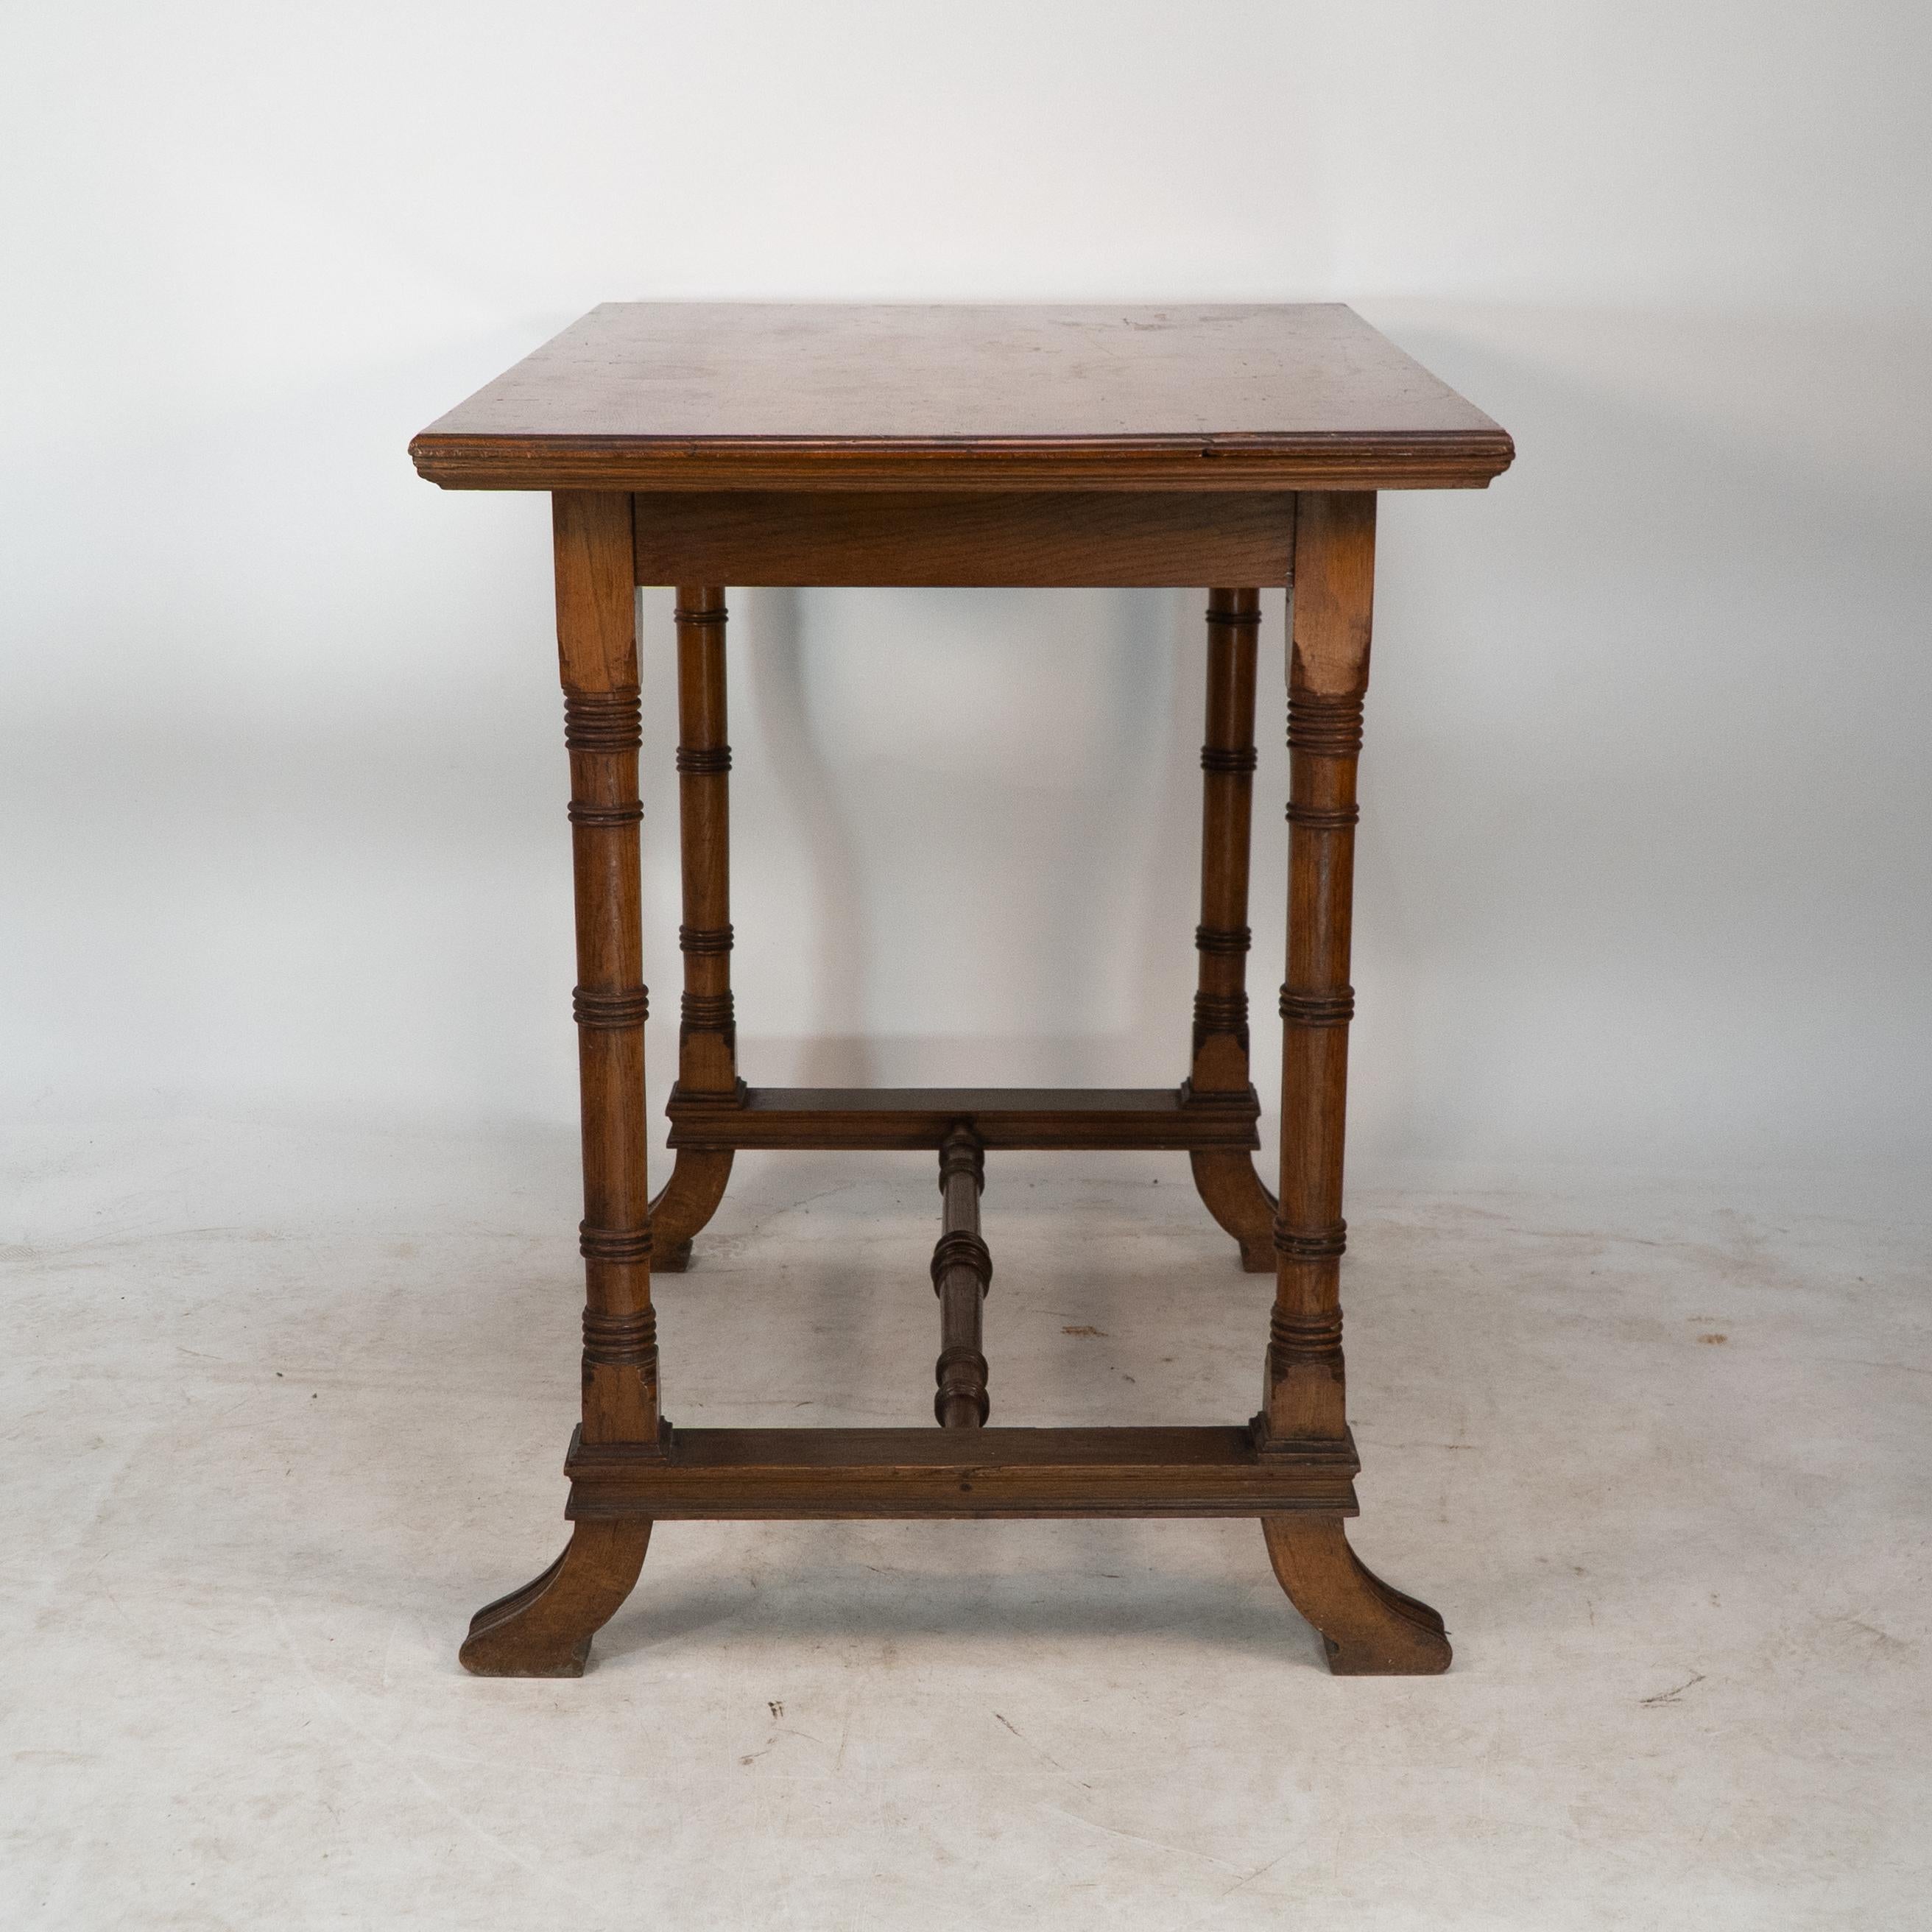 Aesthetic Movement oak oblong side table with ring turned legs, and splayed feet For Sale 1